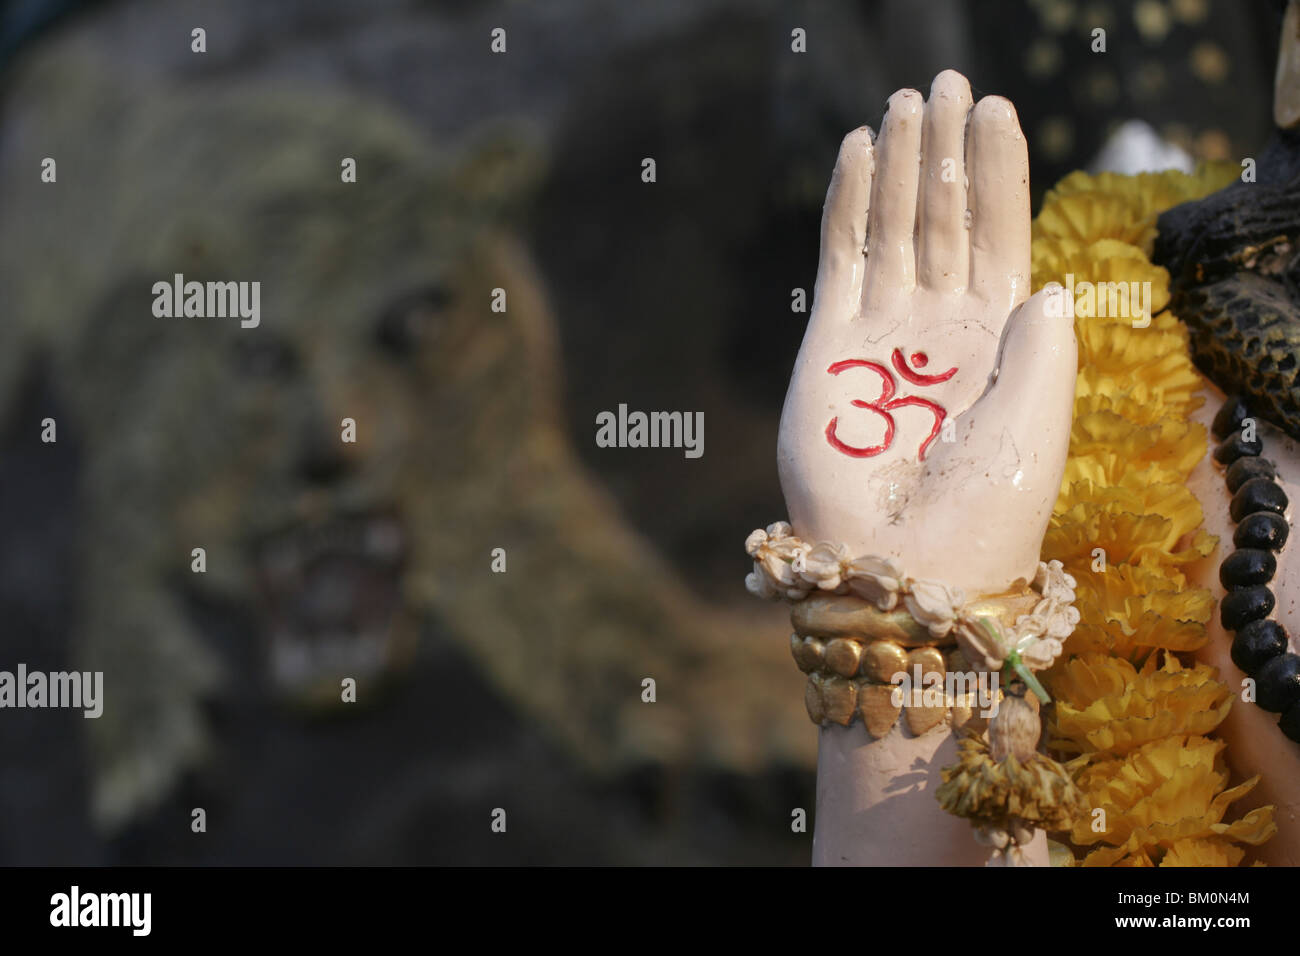 Shiva's hand in front of tiger at Wat Bang Phra, a Buddhist temple in Thailand where monks tattoo devotees. Stock Photo